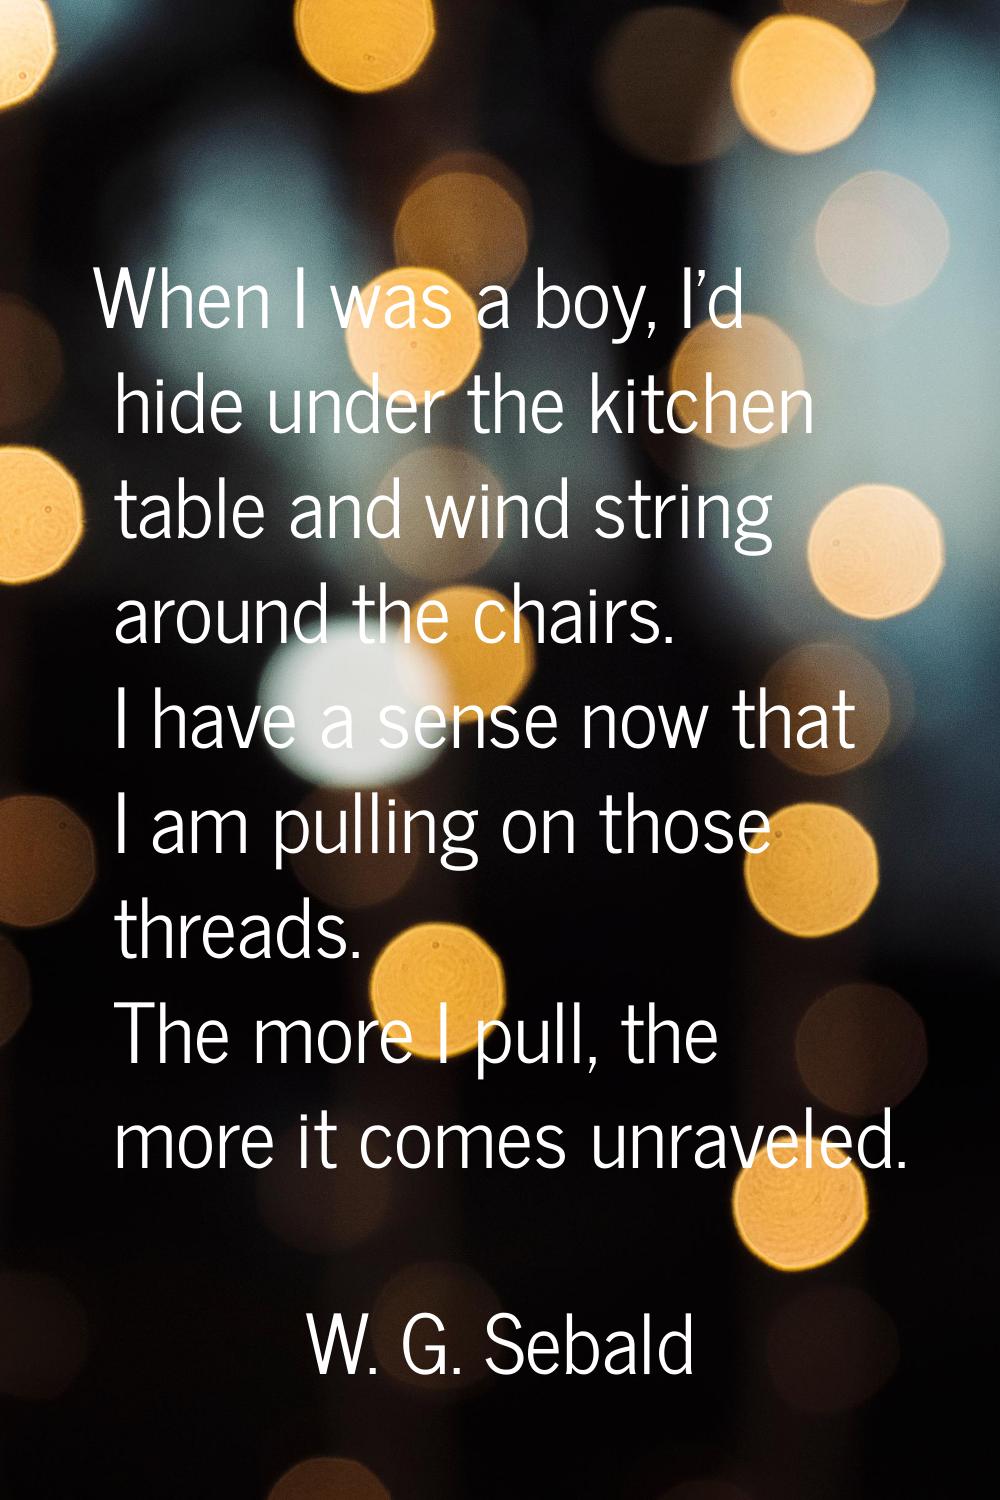 When I was a boy, I'd hide under the kitchen table and wind string around the chairs. I have a sens